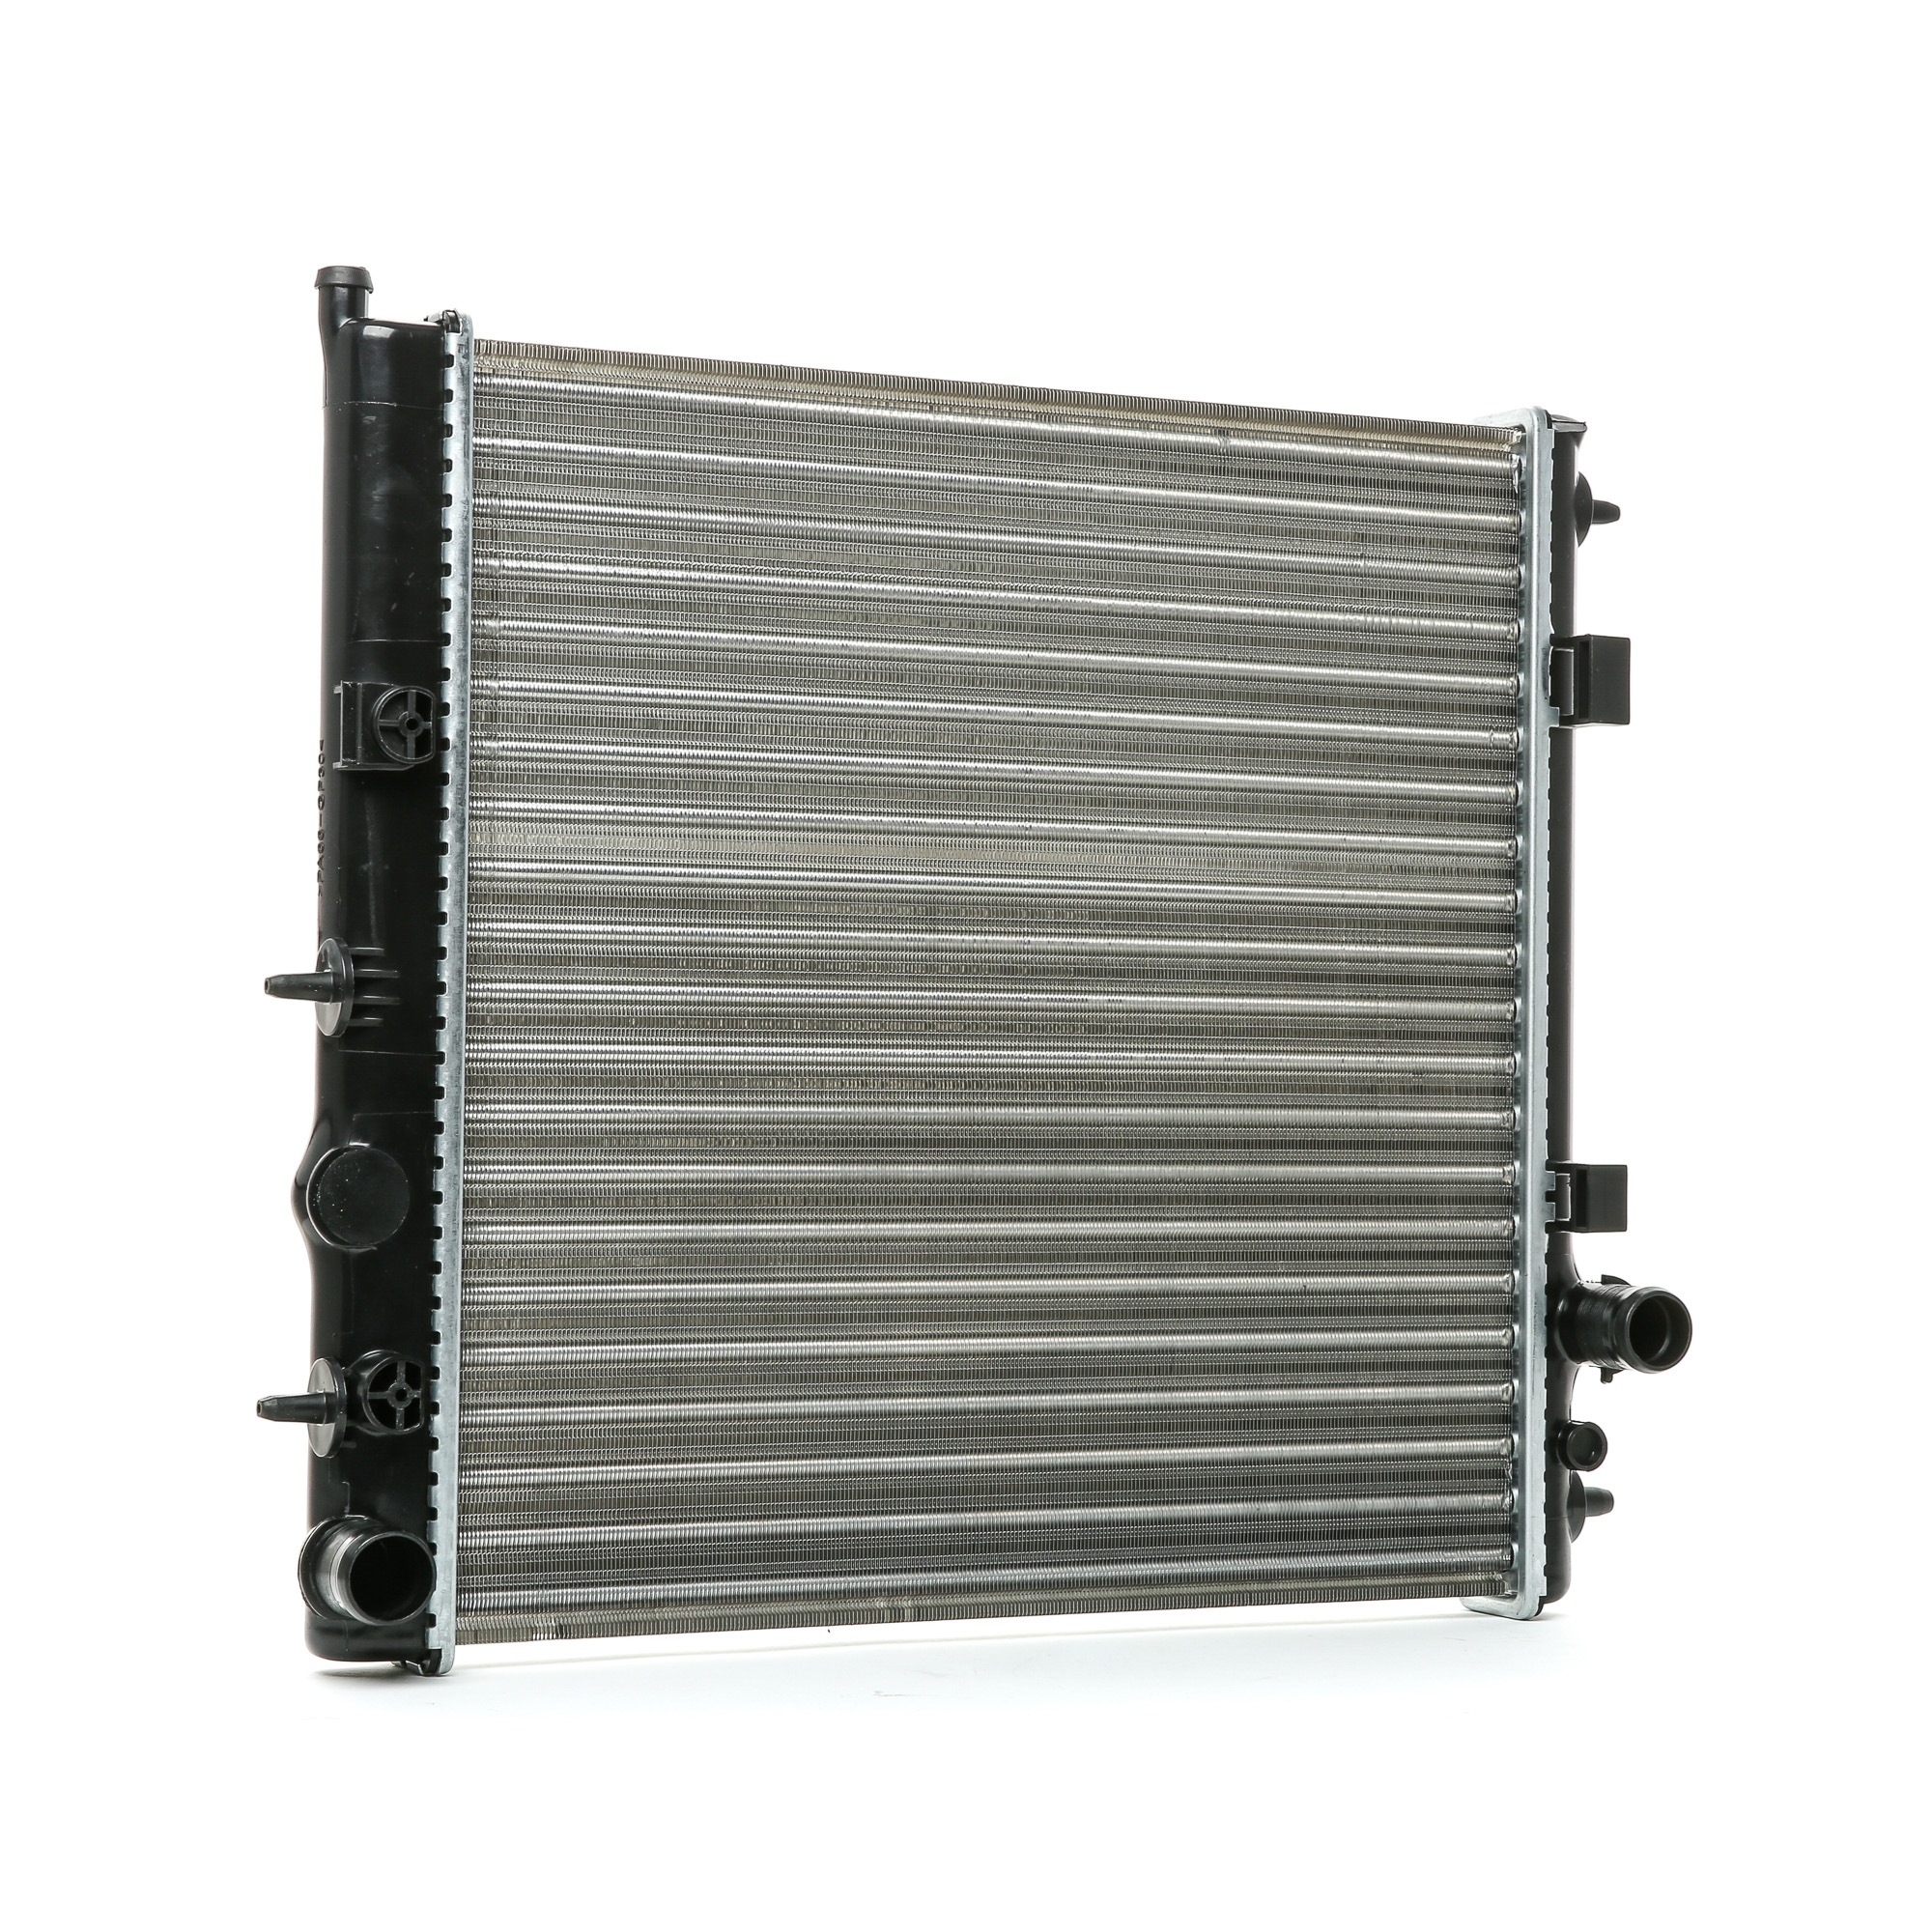 STARK SKRD-0120662 Engine radiator Aluminium, 380 x 398 x 24 mm, without frame, Mechanically jointed cooling fins